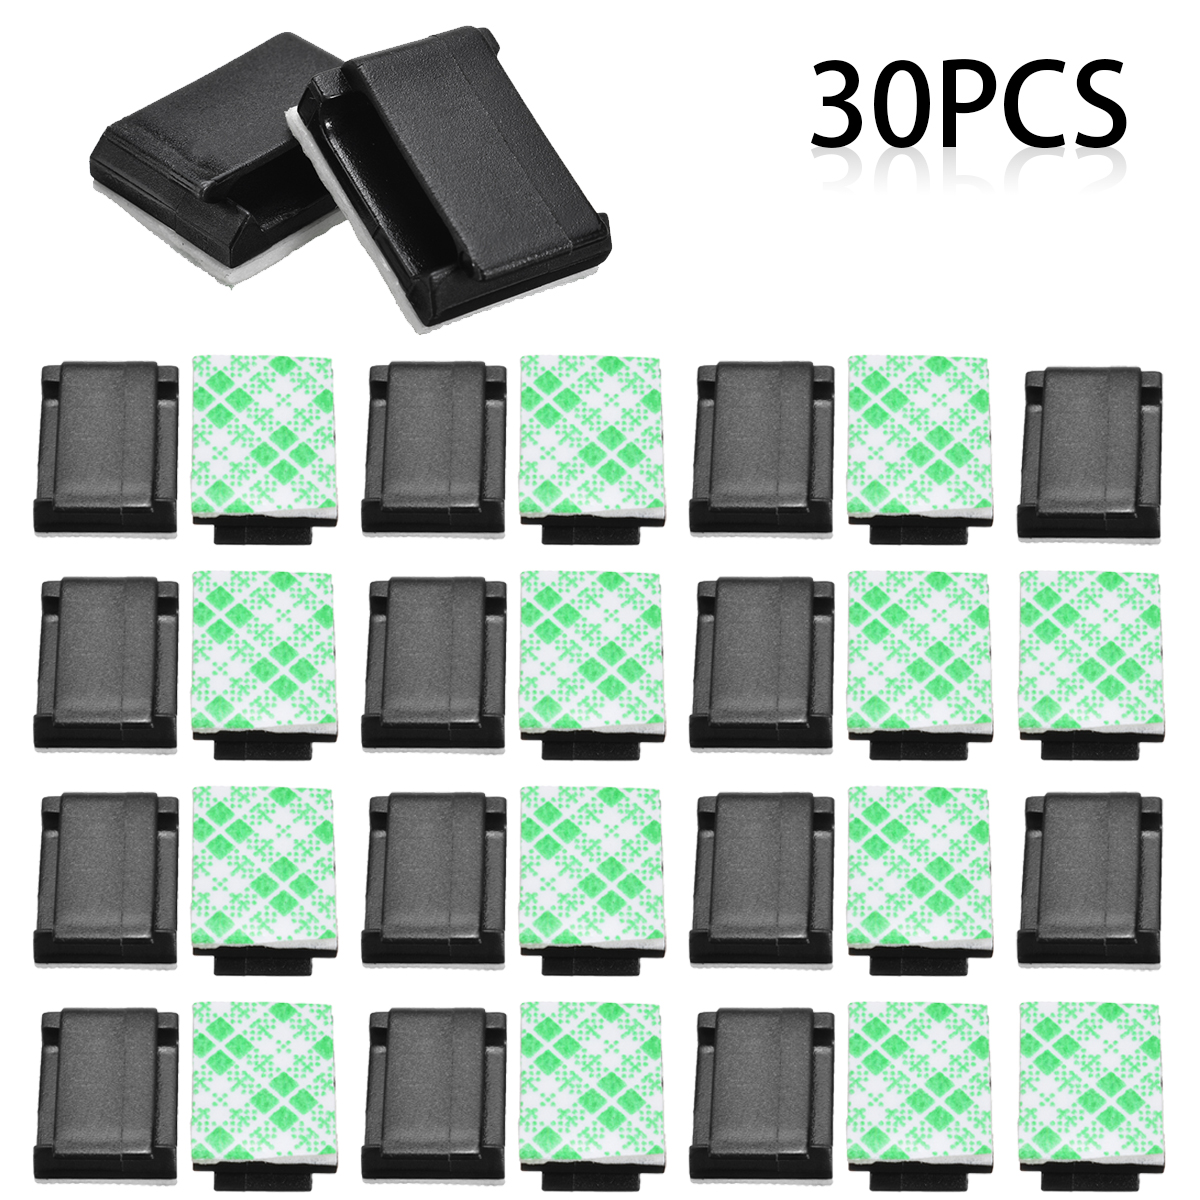 30pcs Self-adhesive Cable Clips Clamp Holder for Rectangle Plastic Mount Clamp Home Parts Accessories